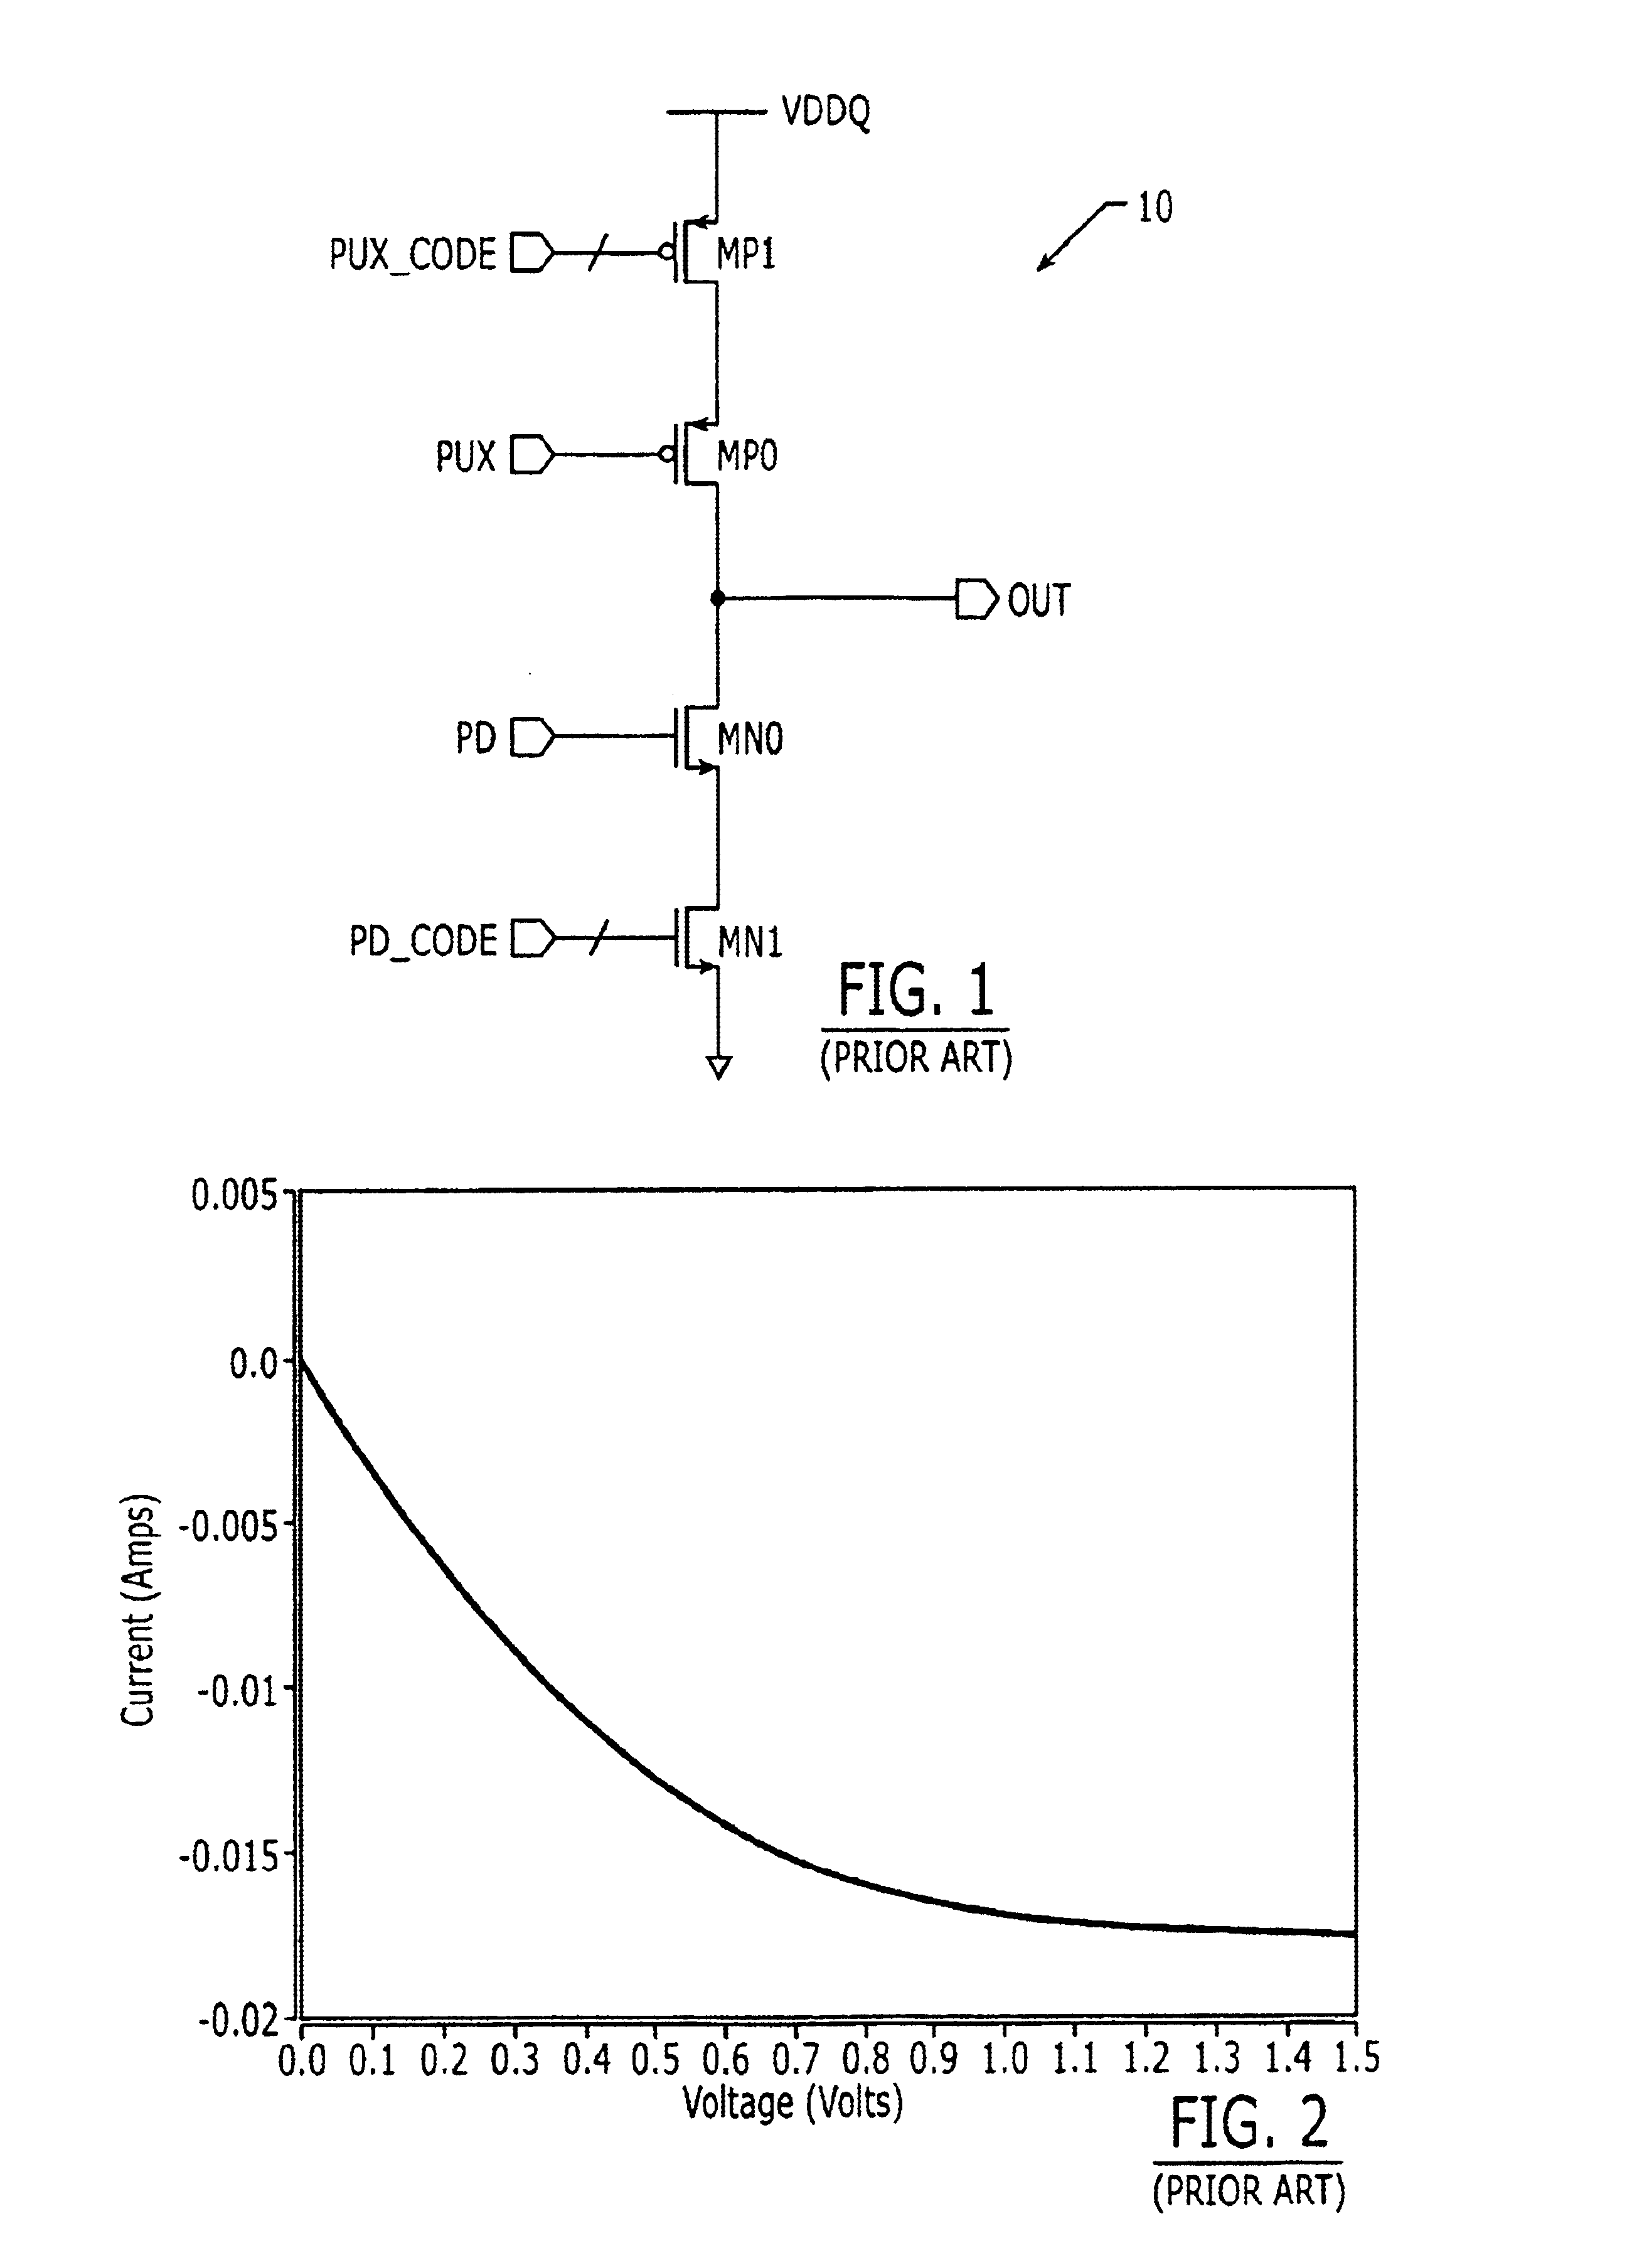 Impedance-matched output driver circuits having linear characteristics and enhanced coarse and fine tuning control